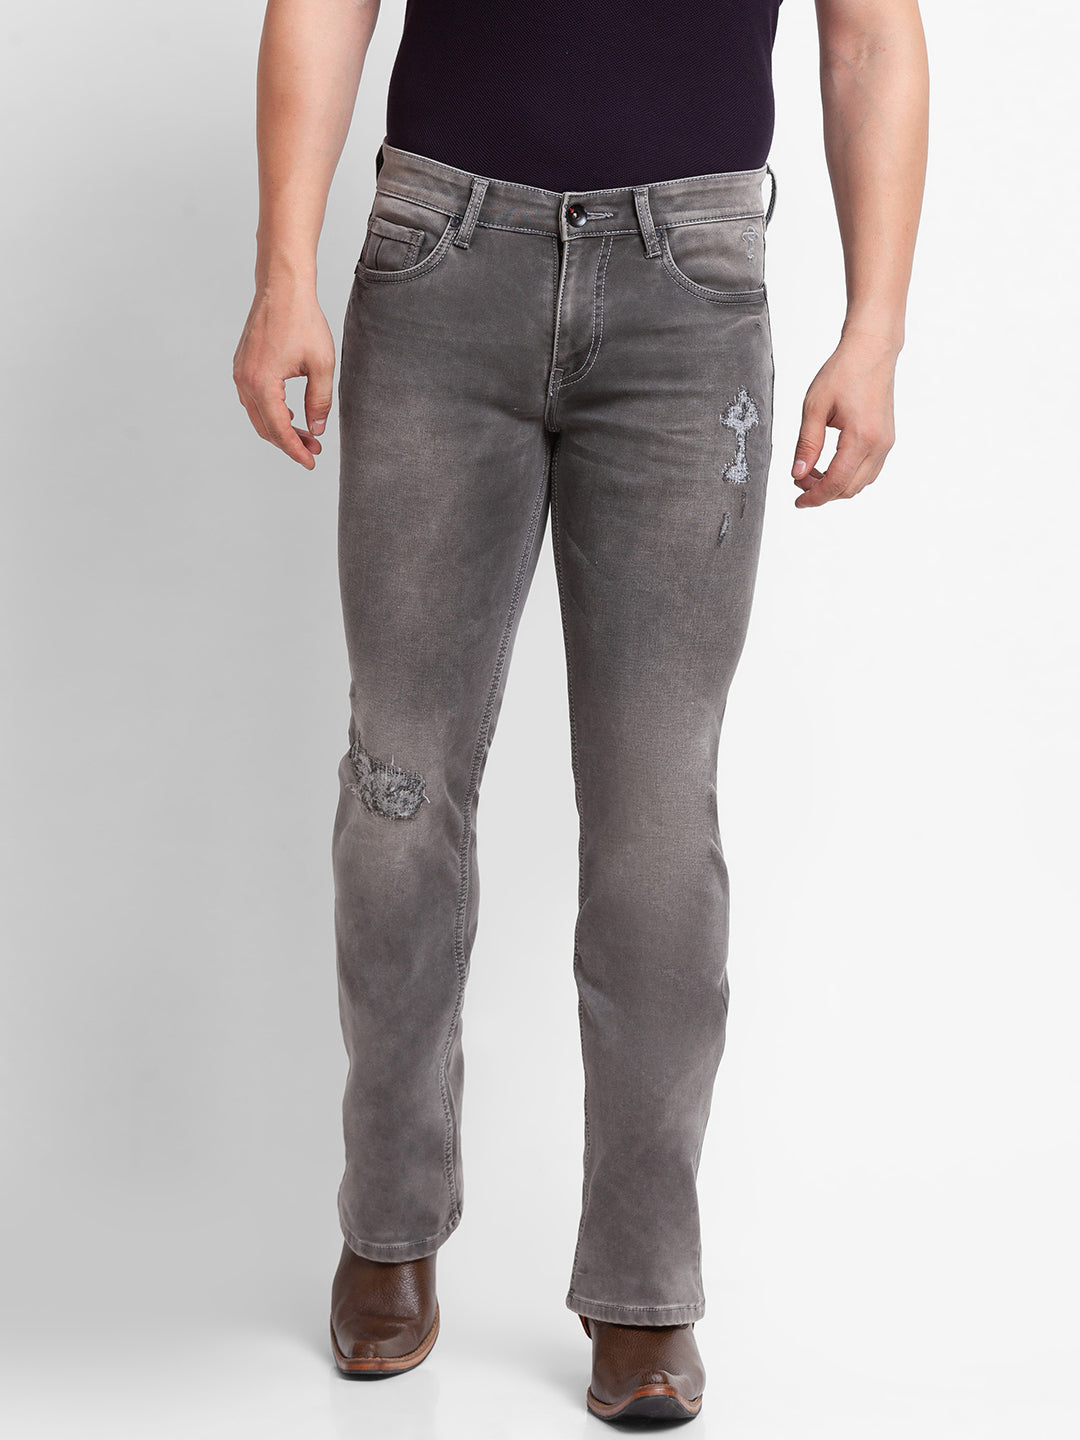 Light Grey Distressed Bootcut Jeans for Men